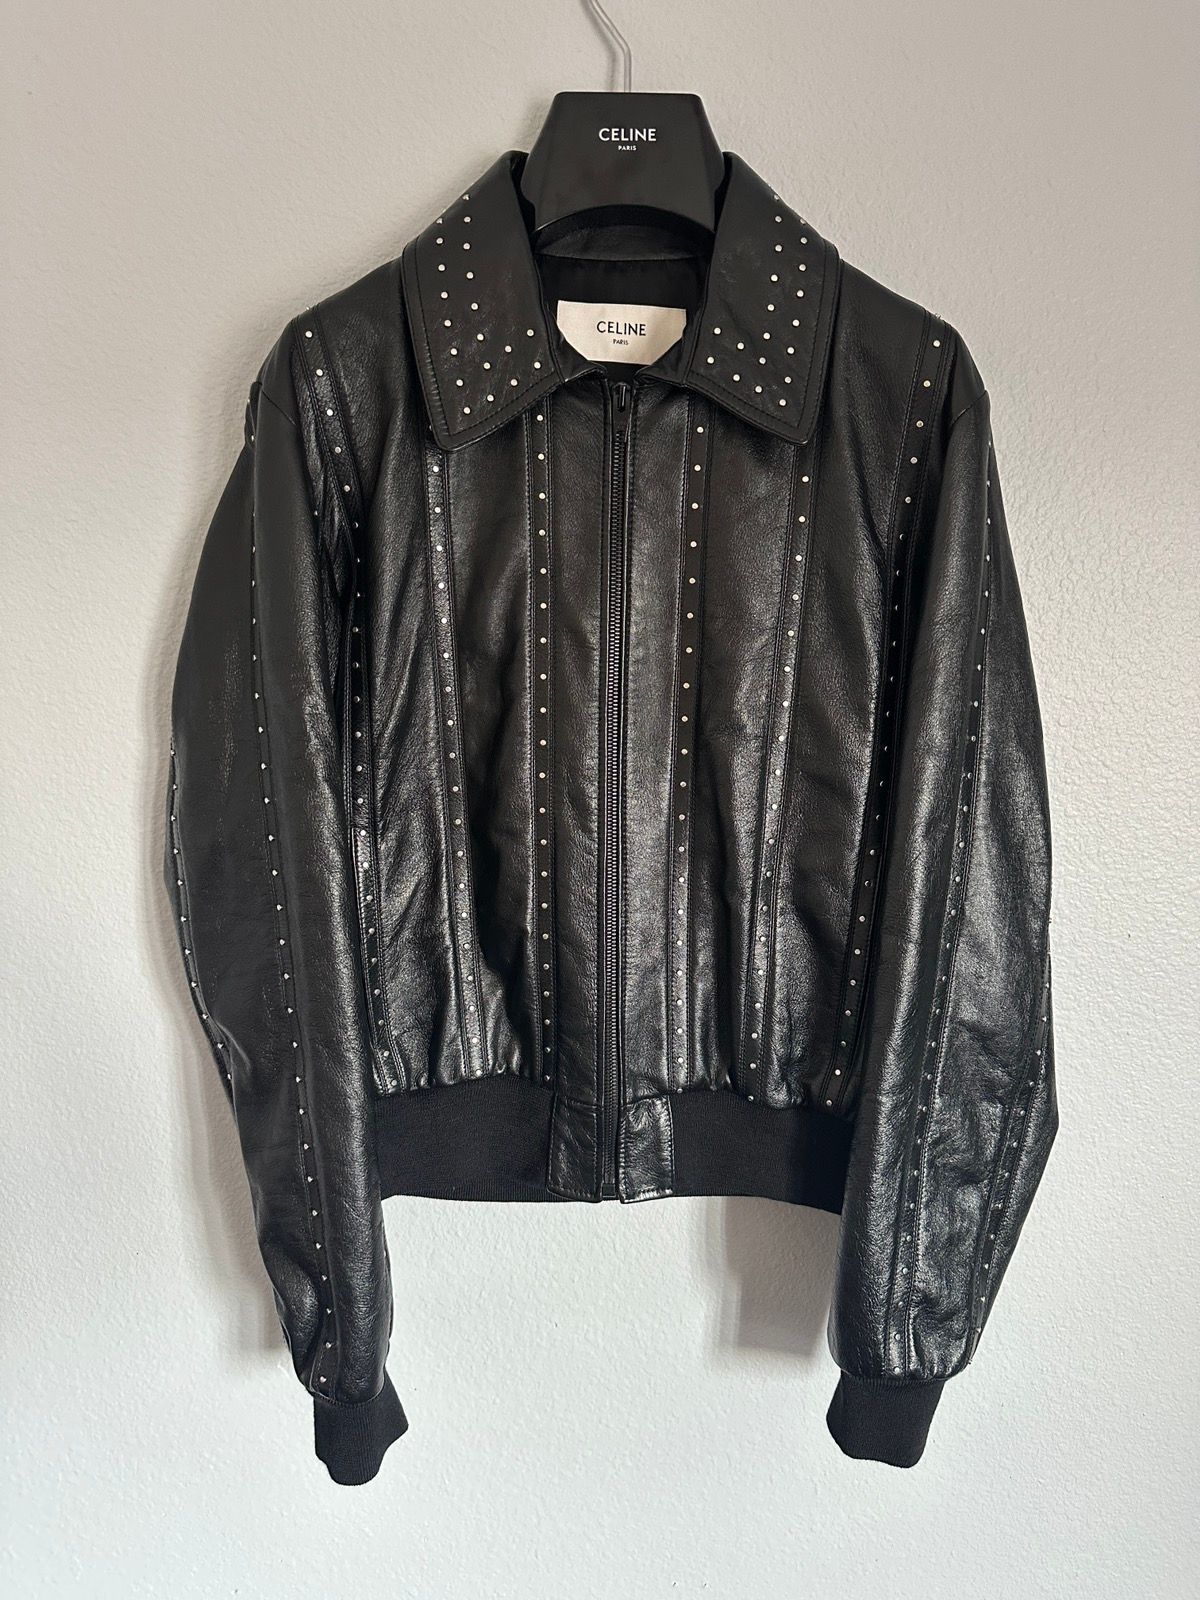 image of Celine Ss19 Runway Studded Leather Jacket in Black, Men's (Size Small)